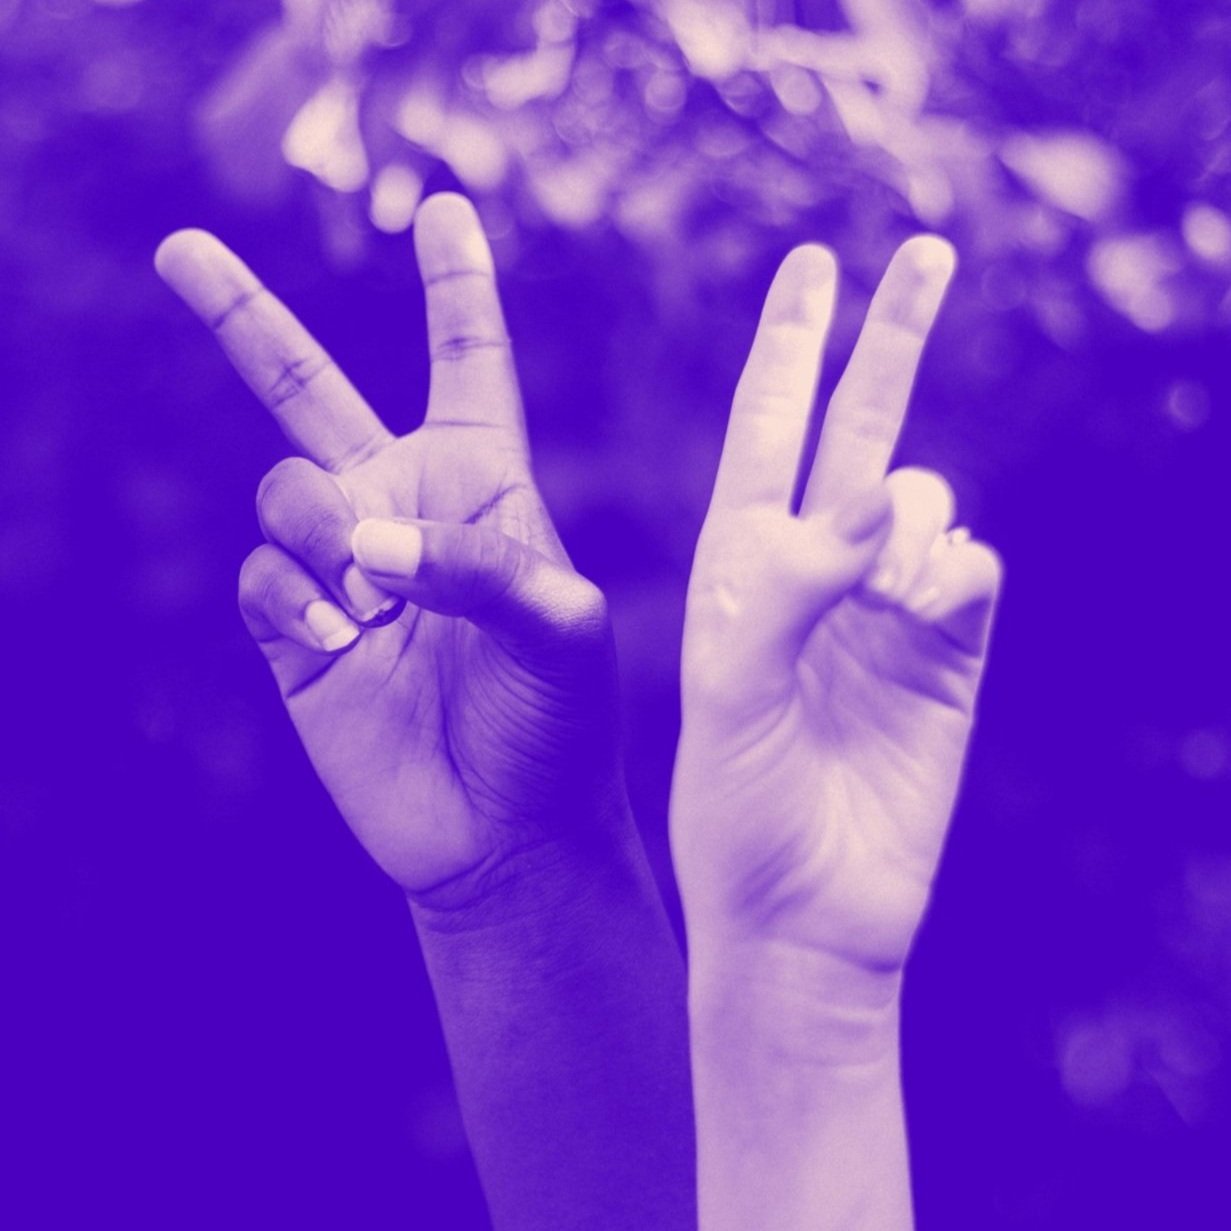 Image of a black hand and a white hand making peace signs